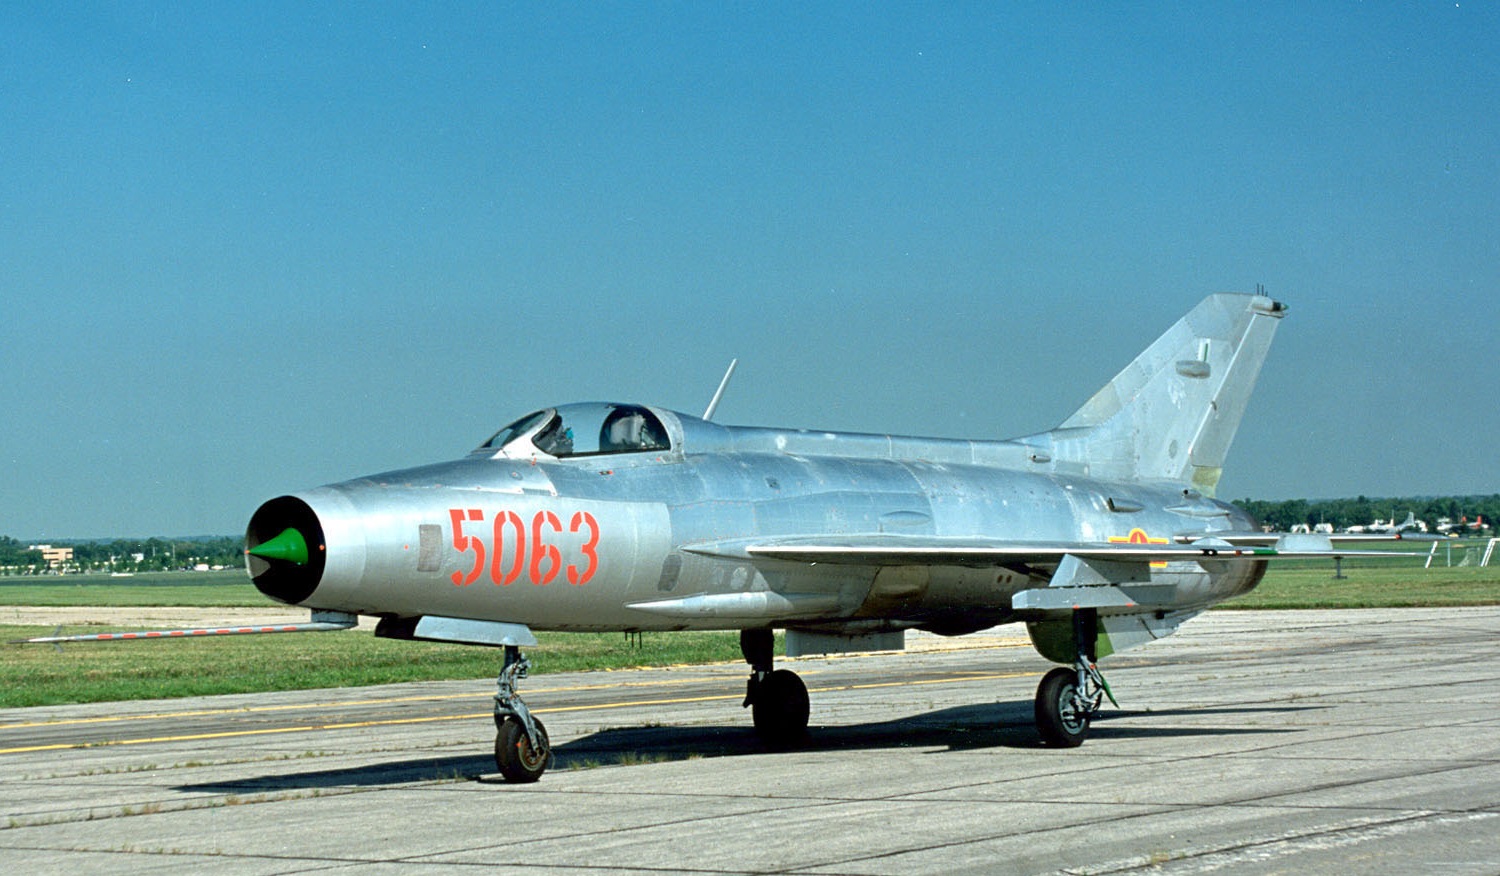 A Mikoyan Gurevich MiG-21 at the National Museum of the United States Air Force. (U.S. Air Force)